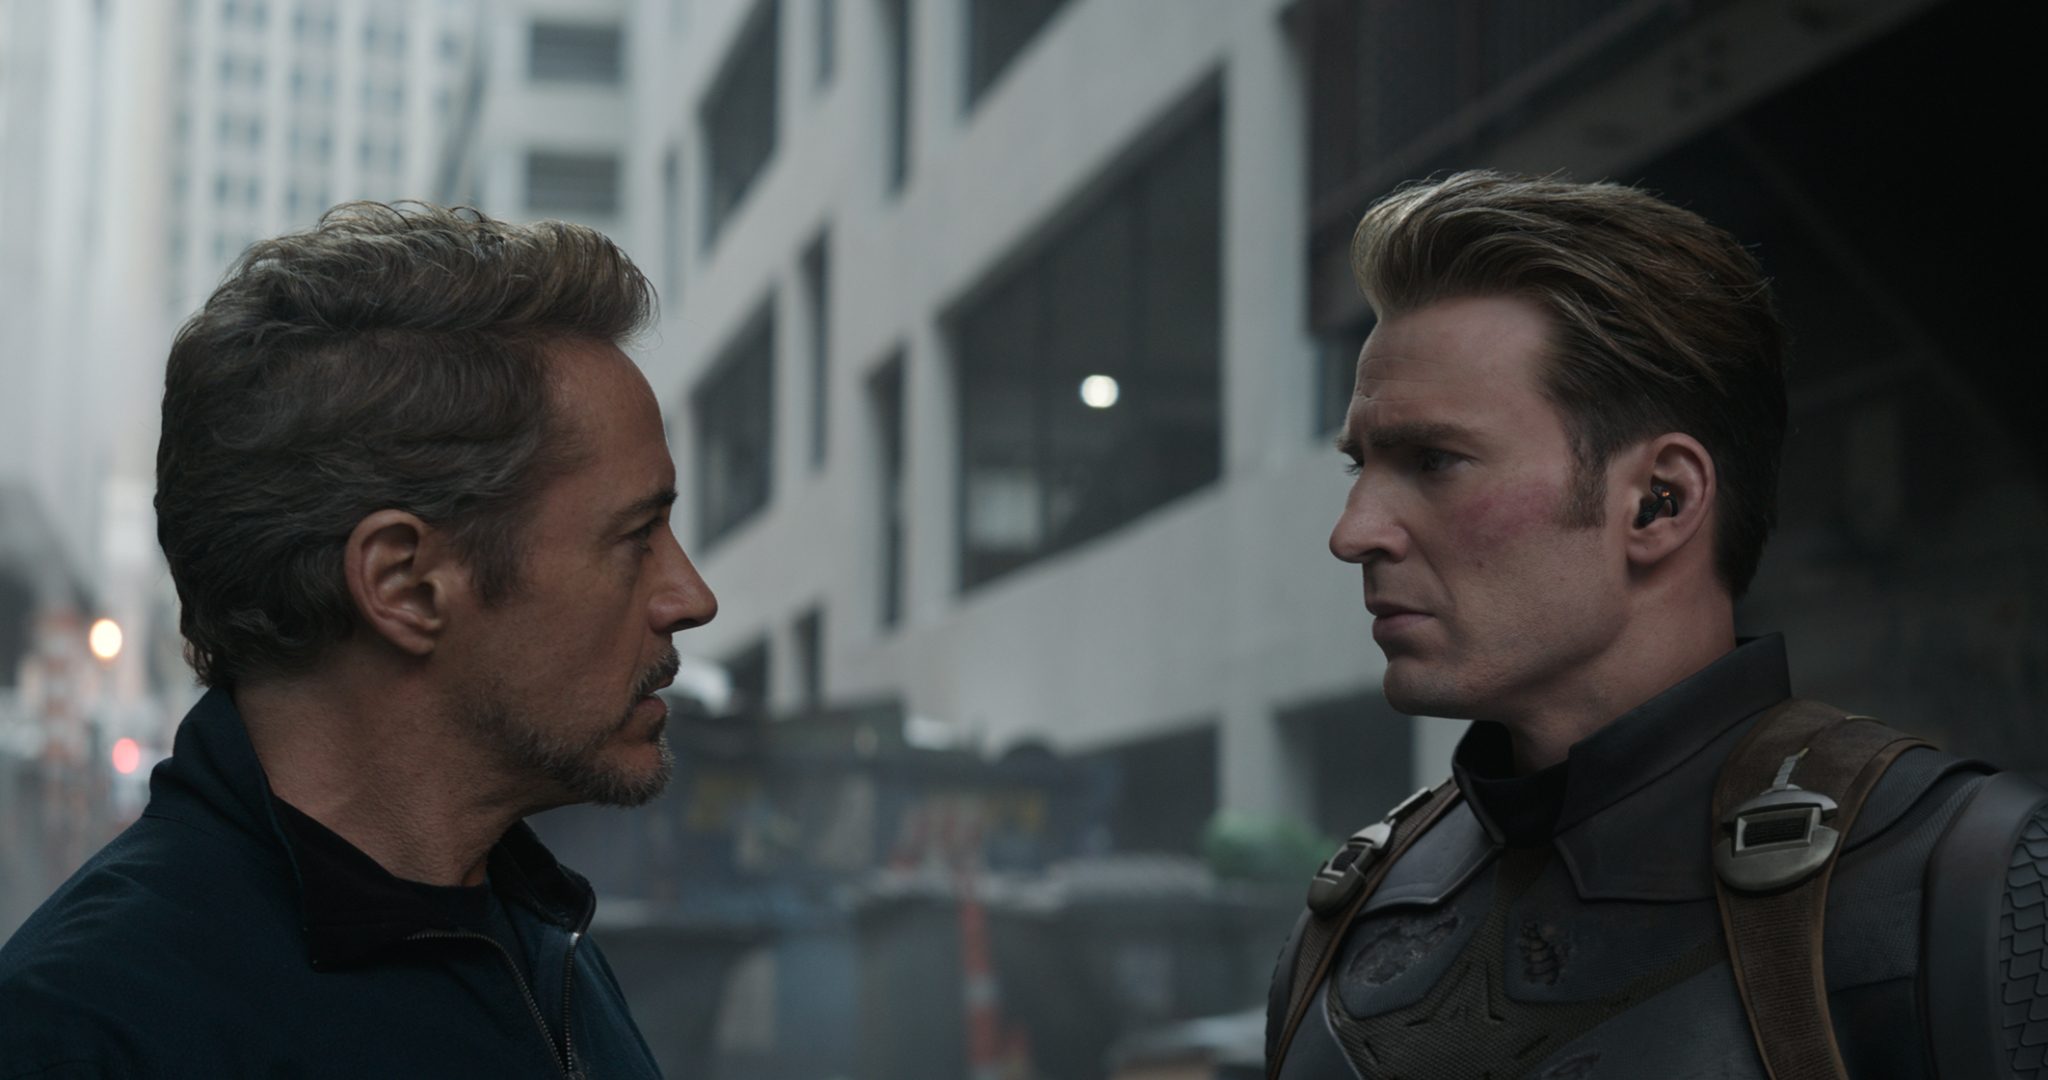 ‘Avengers: Endgame’ sails past ‘Titanic,’ now 2nd highest-grossing movie ever